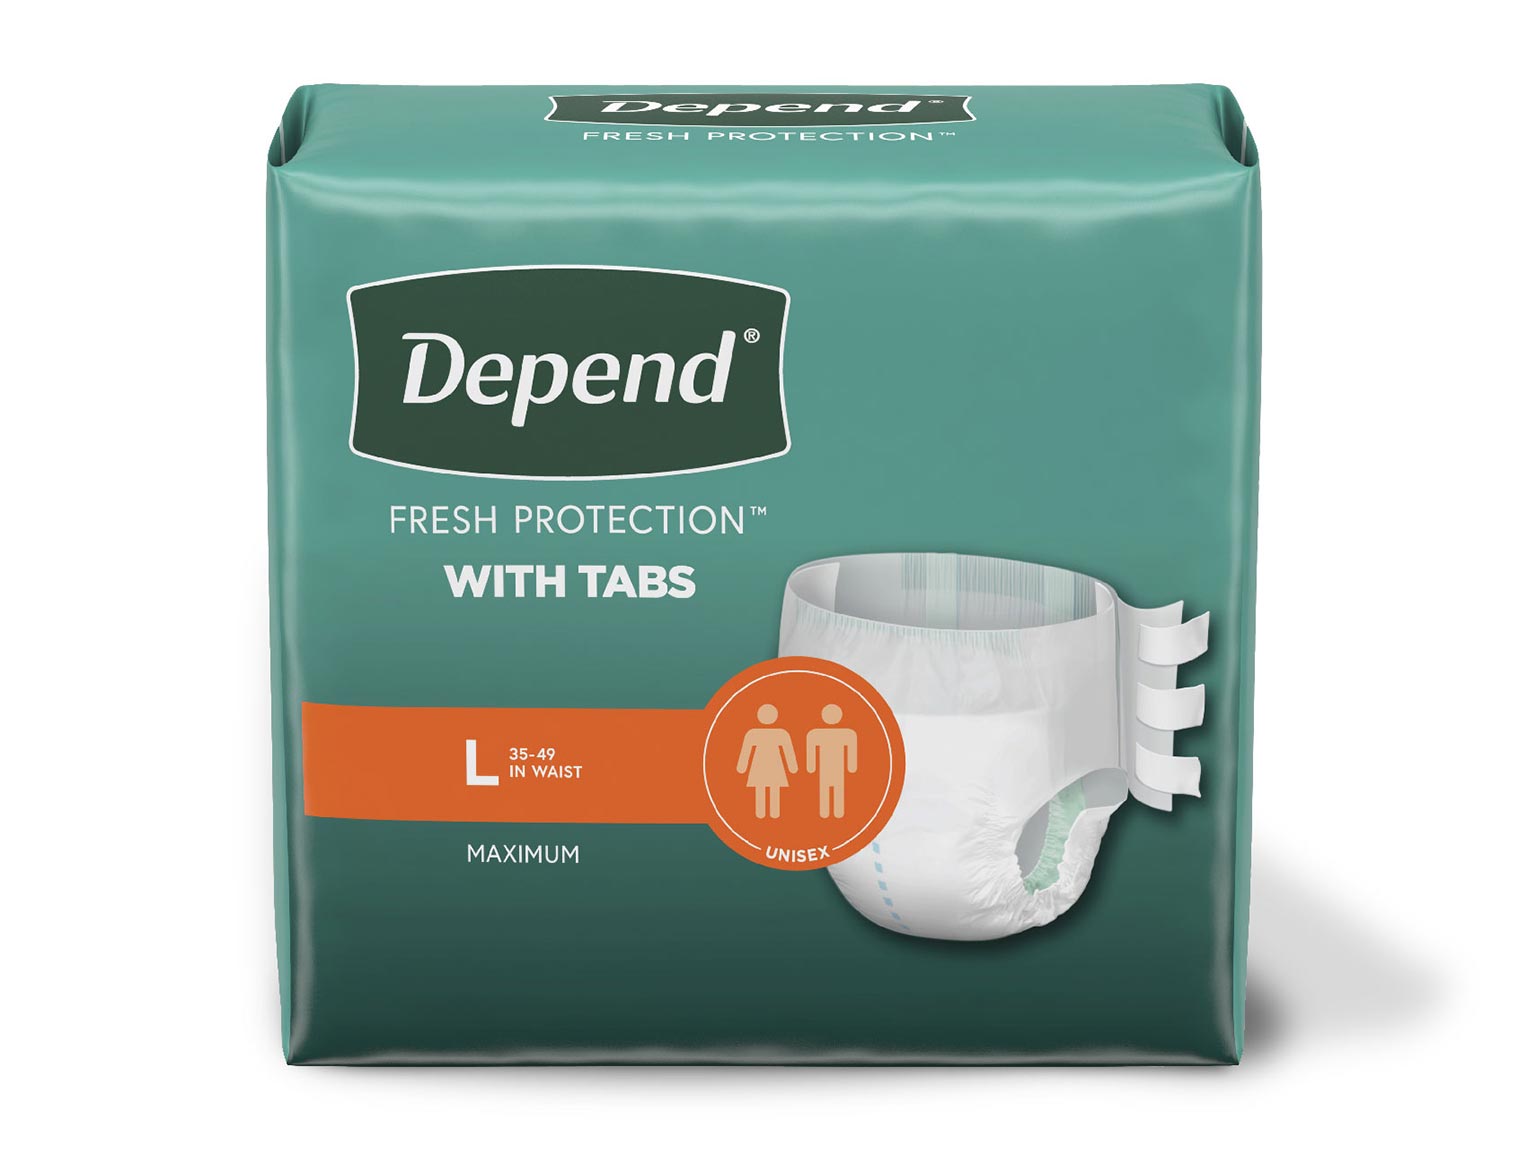 Depend® Protection Plus+ Underwear for Women Ultimate Absorbency